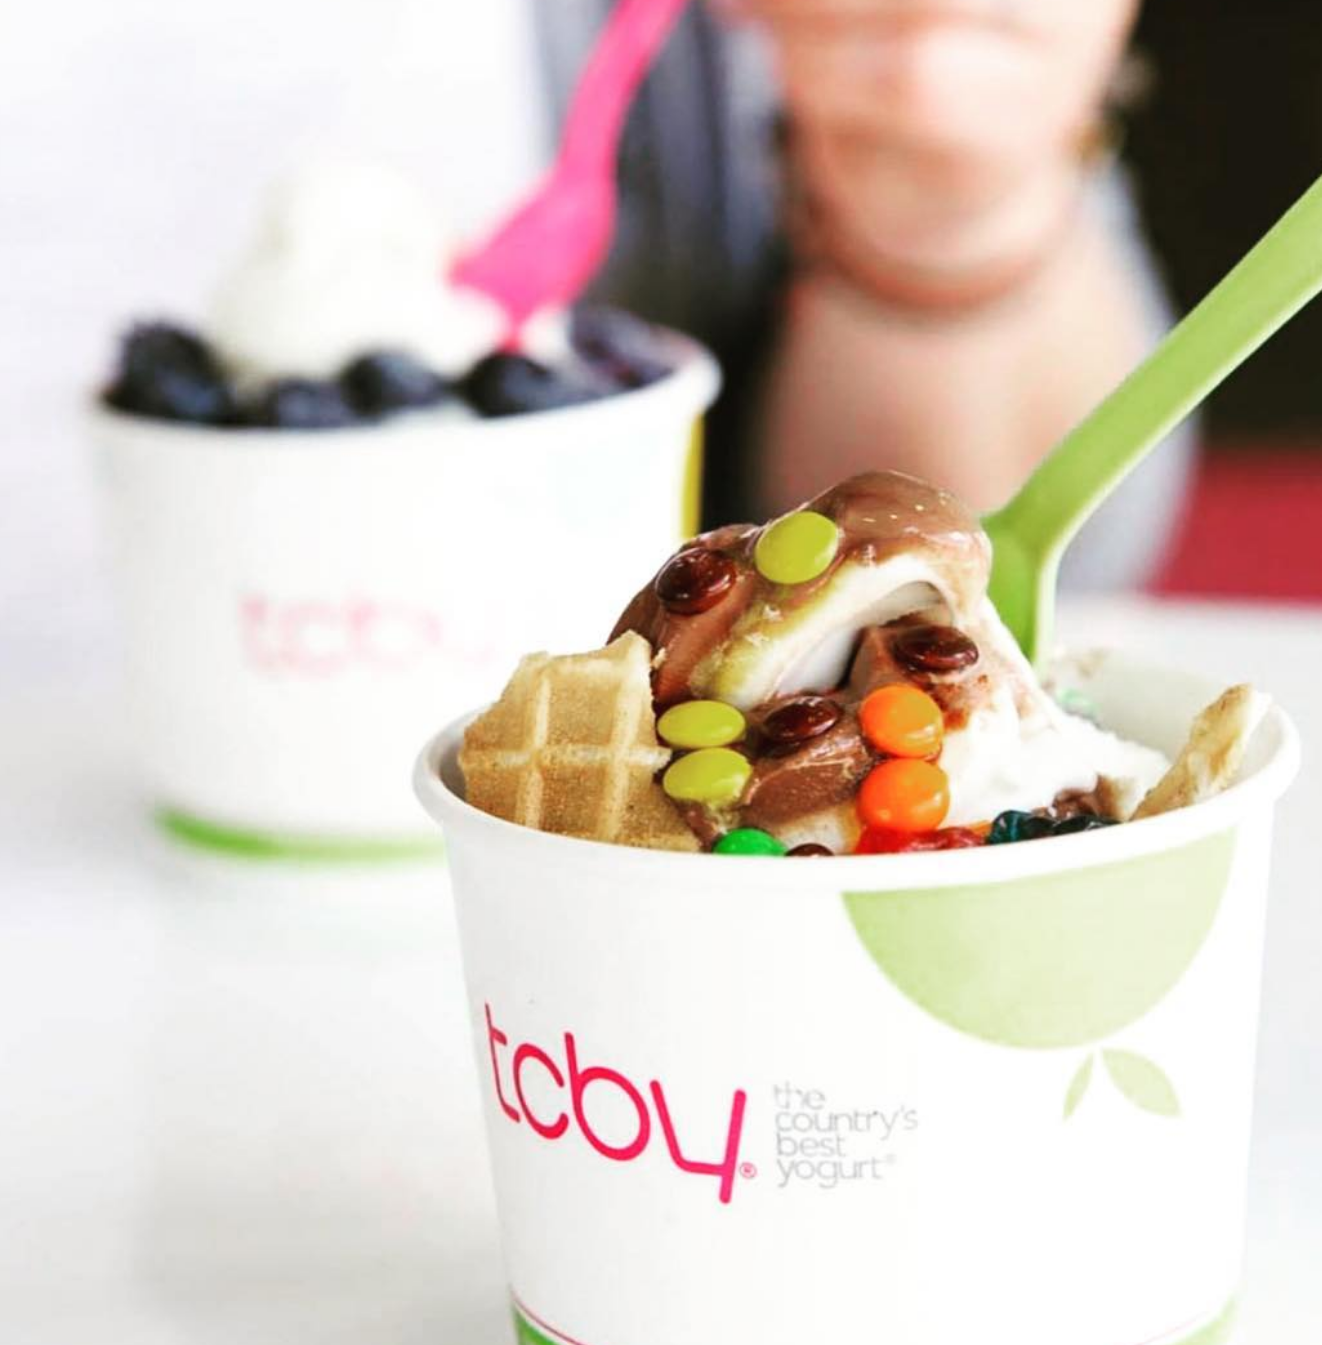 Frozen Yogurt And Waffles From TCBY In Irving, TX